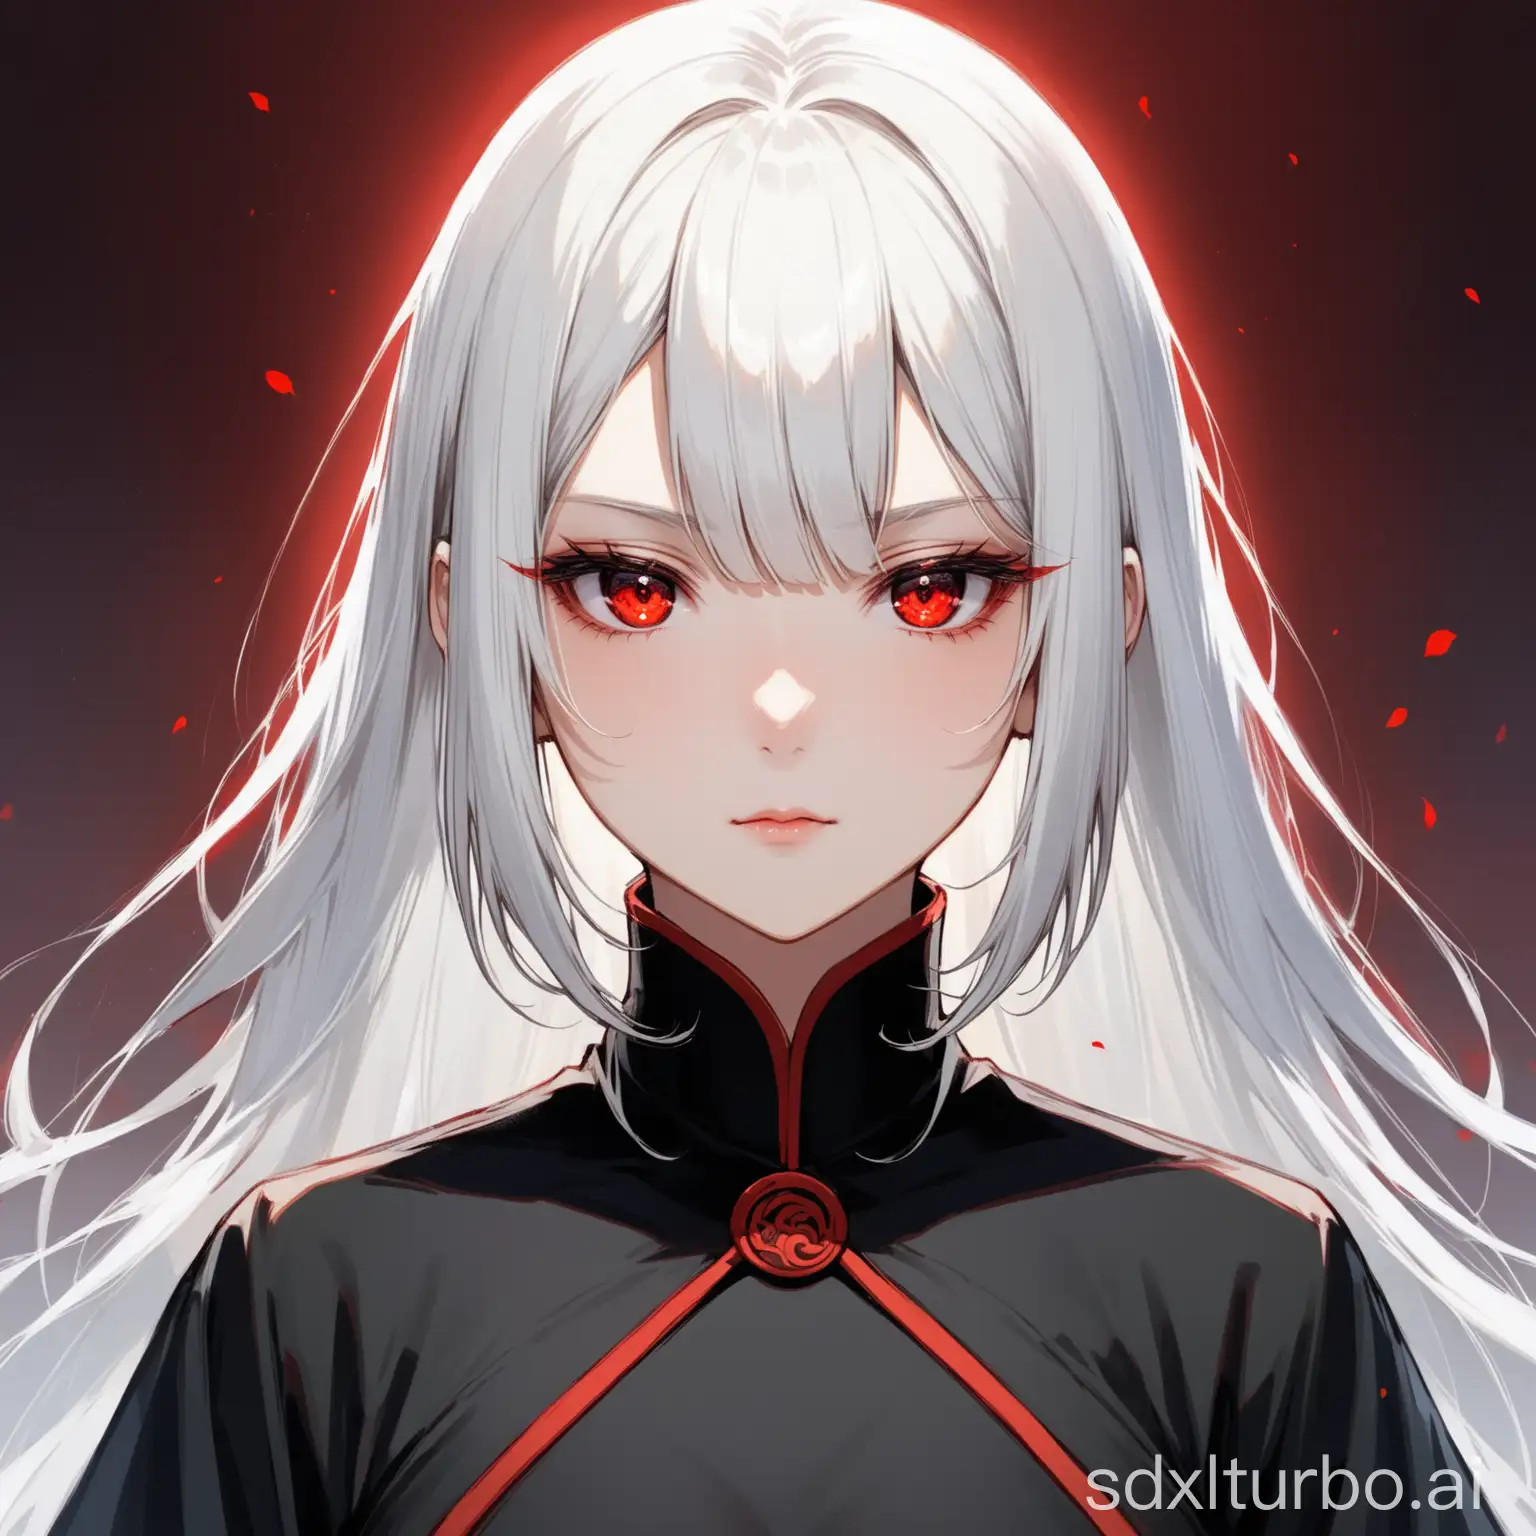 Mysterious-BlackClad-Woman-with-Piercing-Red-Eyes-and-White-Hair